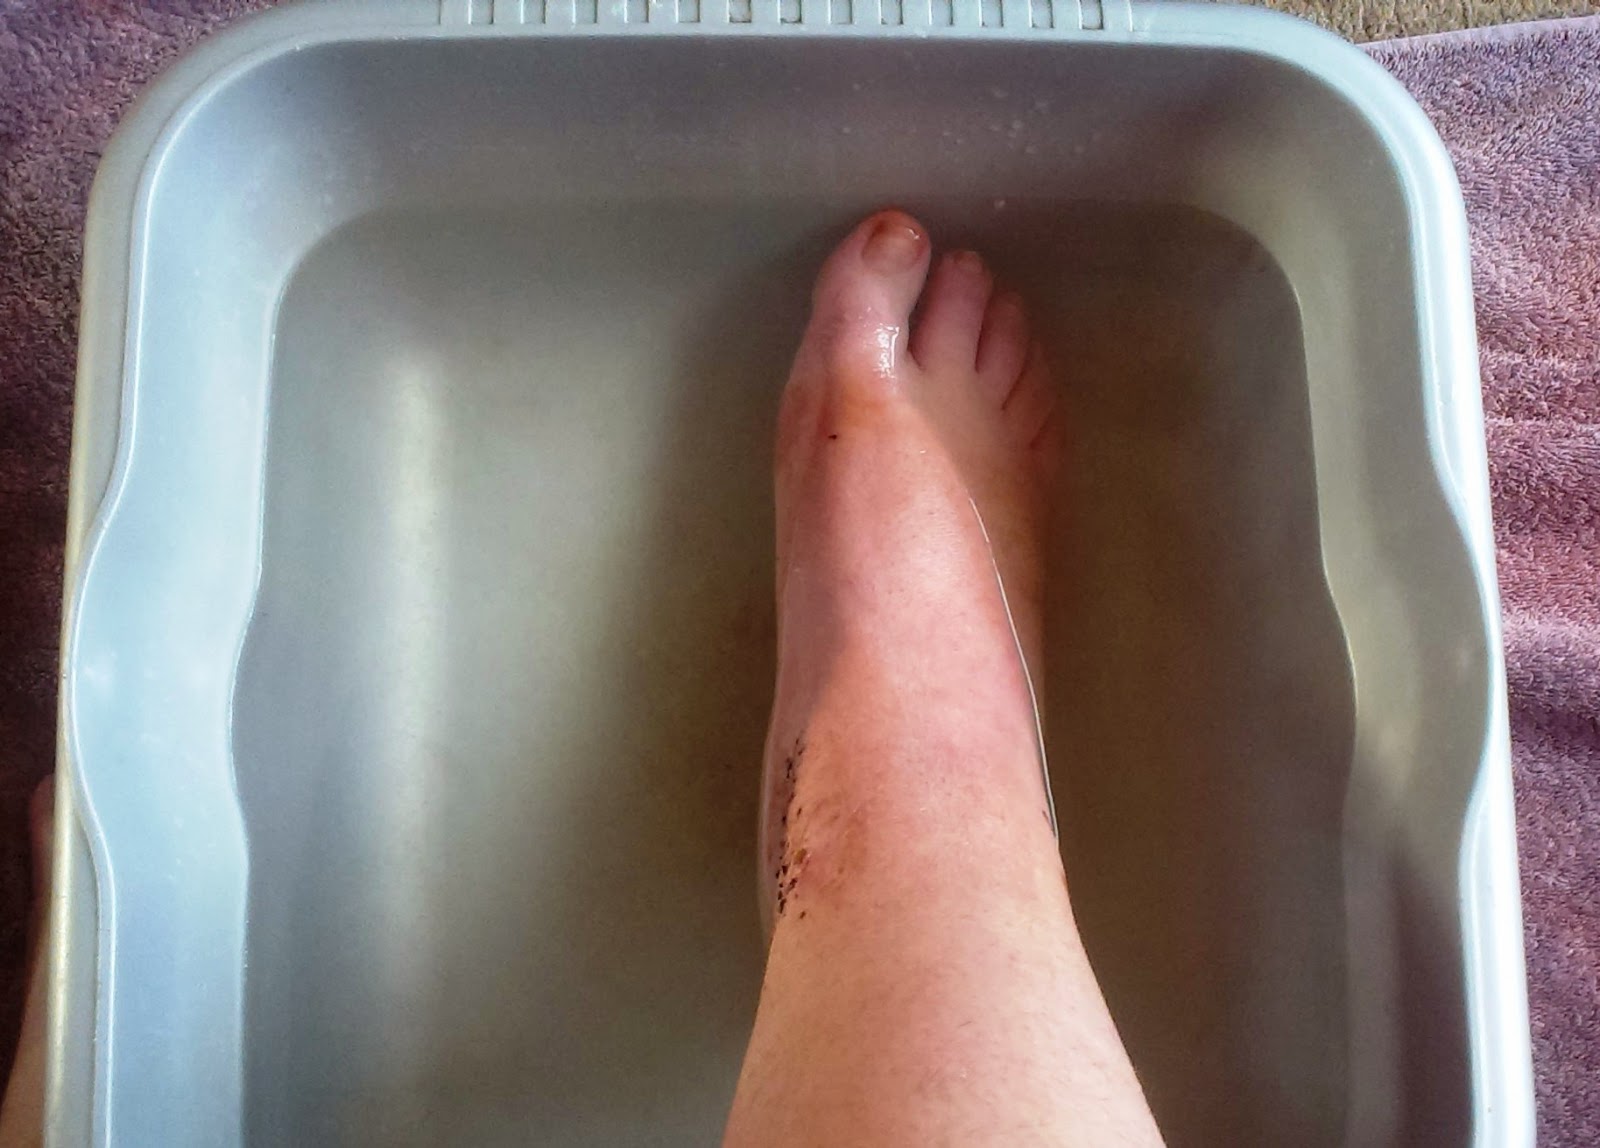 Putting my foot in water after six weeks